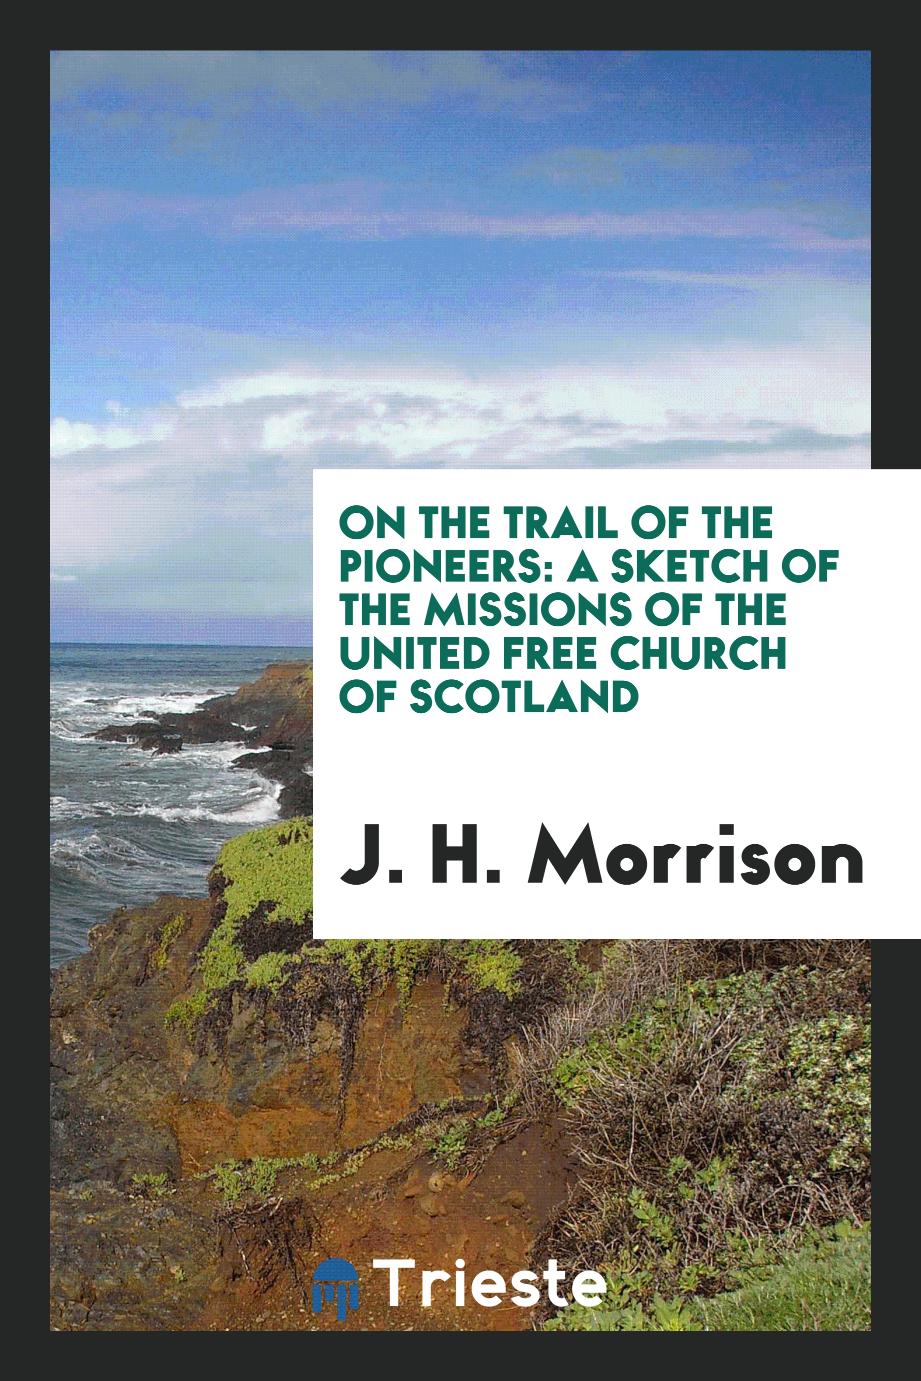 On the trail of the pioneers: a sketch of the missions of the United Free Church of Scotland